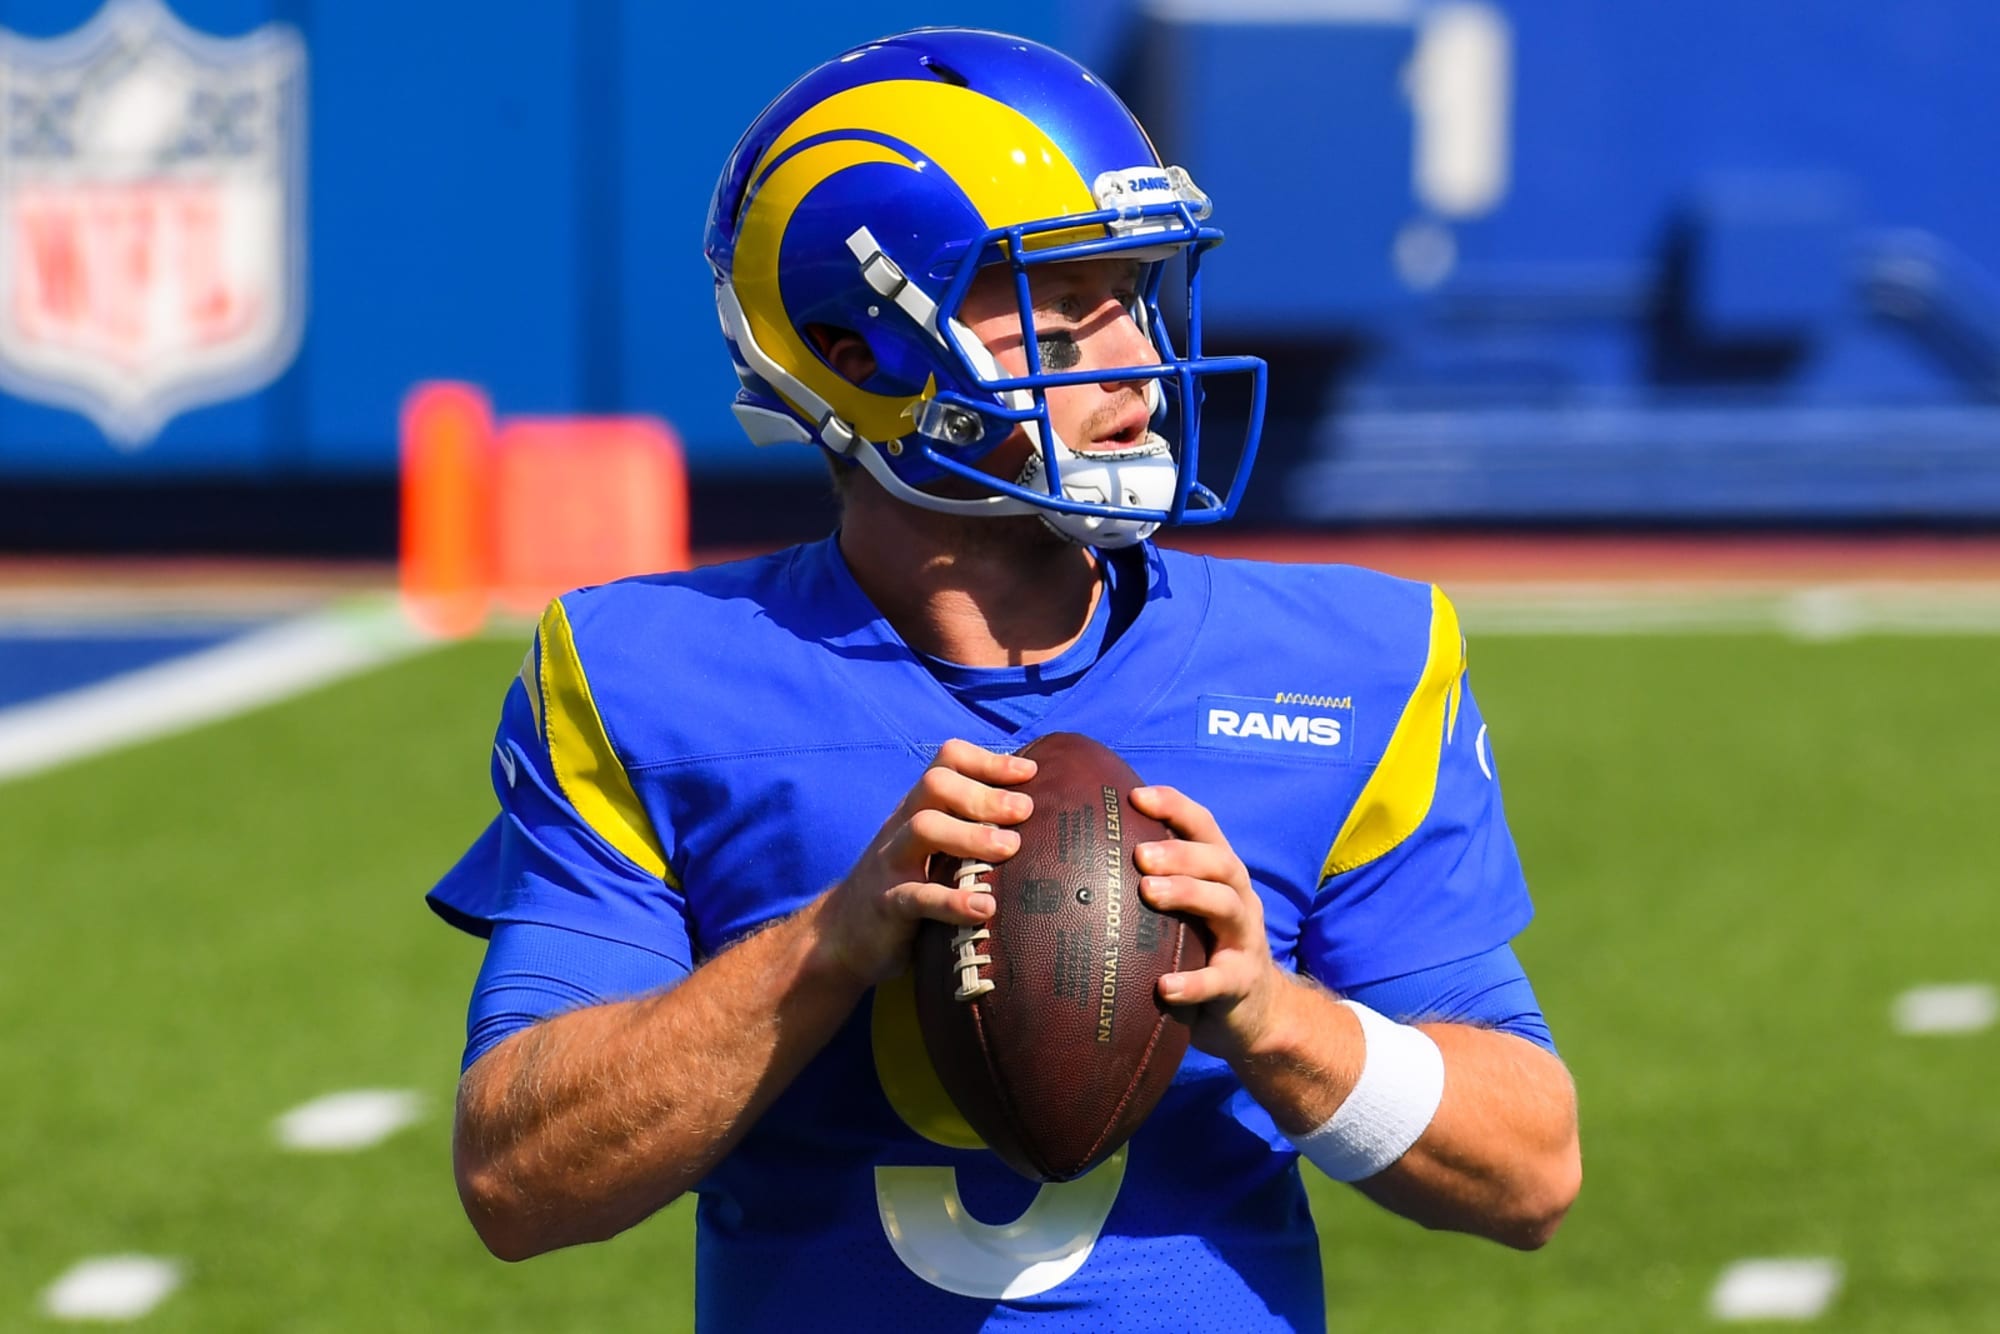 Can the LA Rams's new QB take the team to the playoffs? Find out here